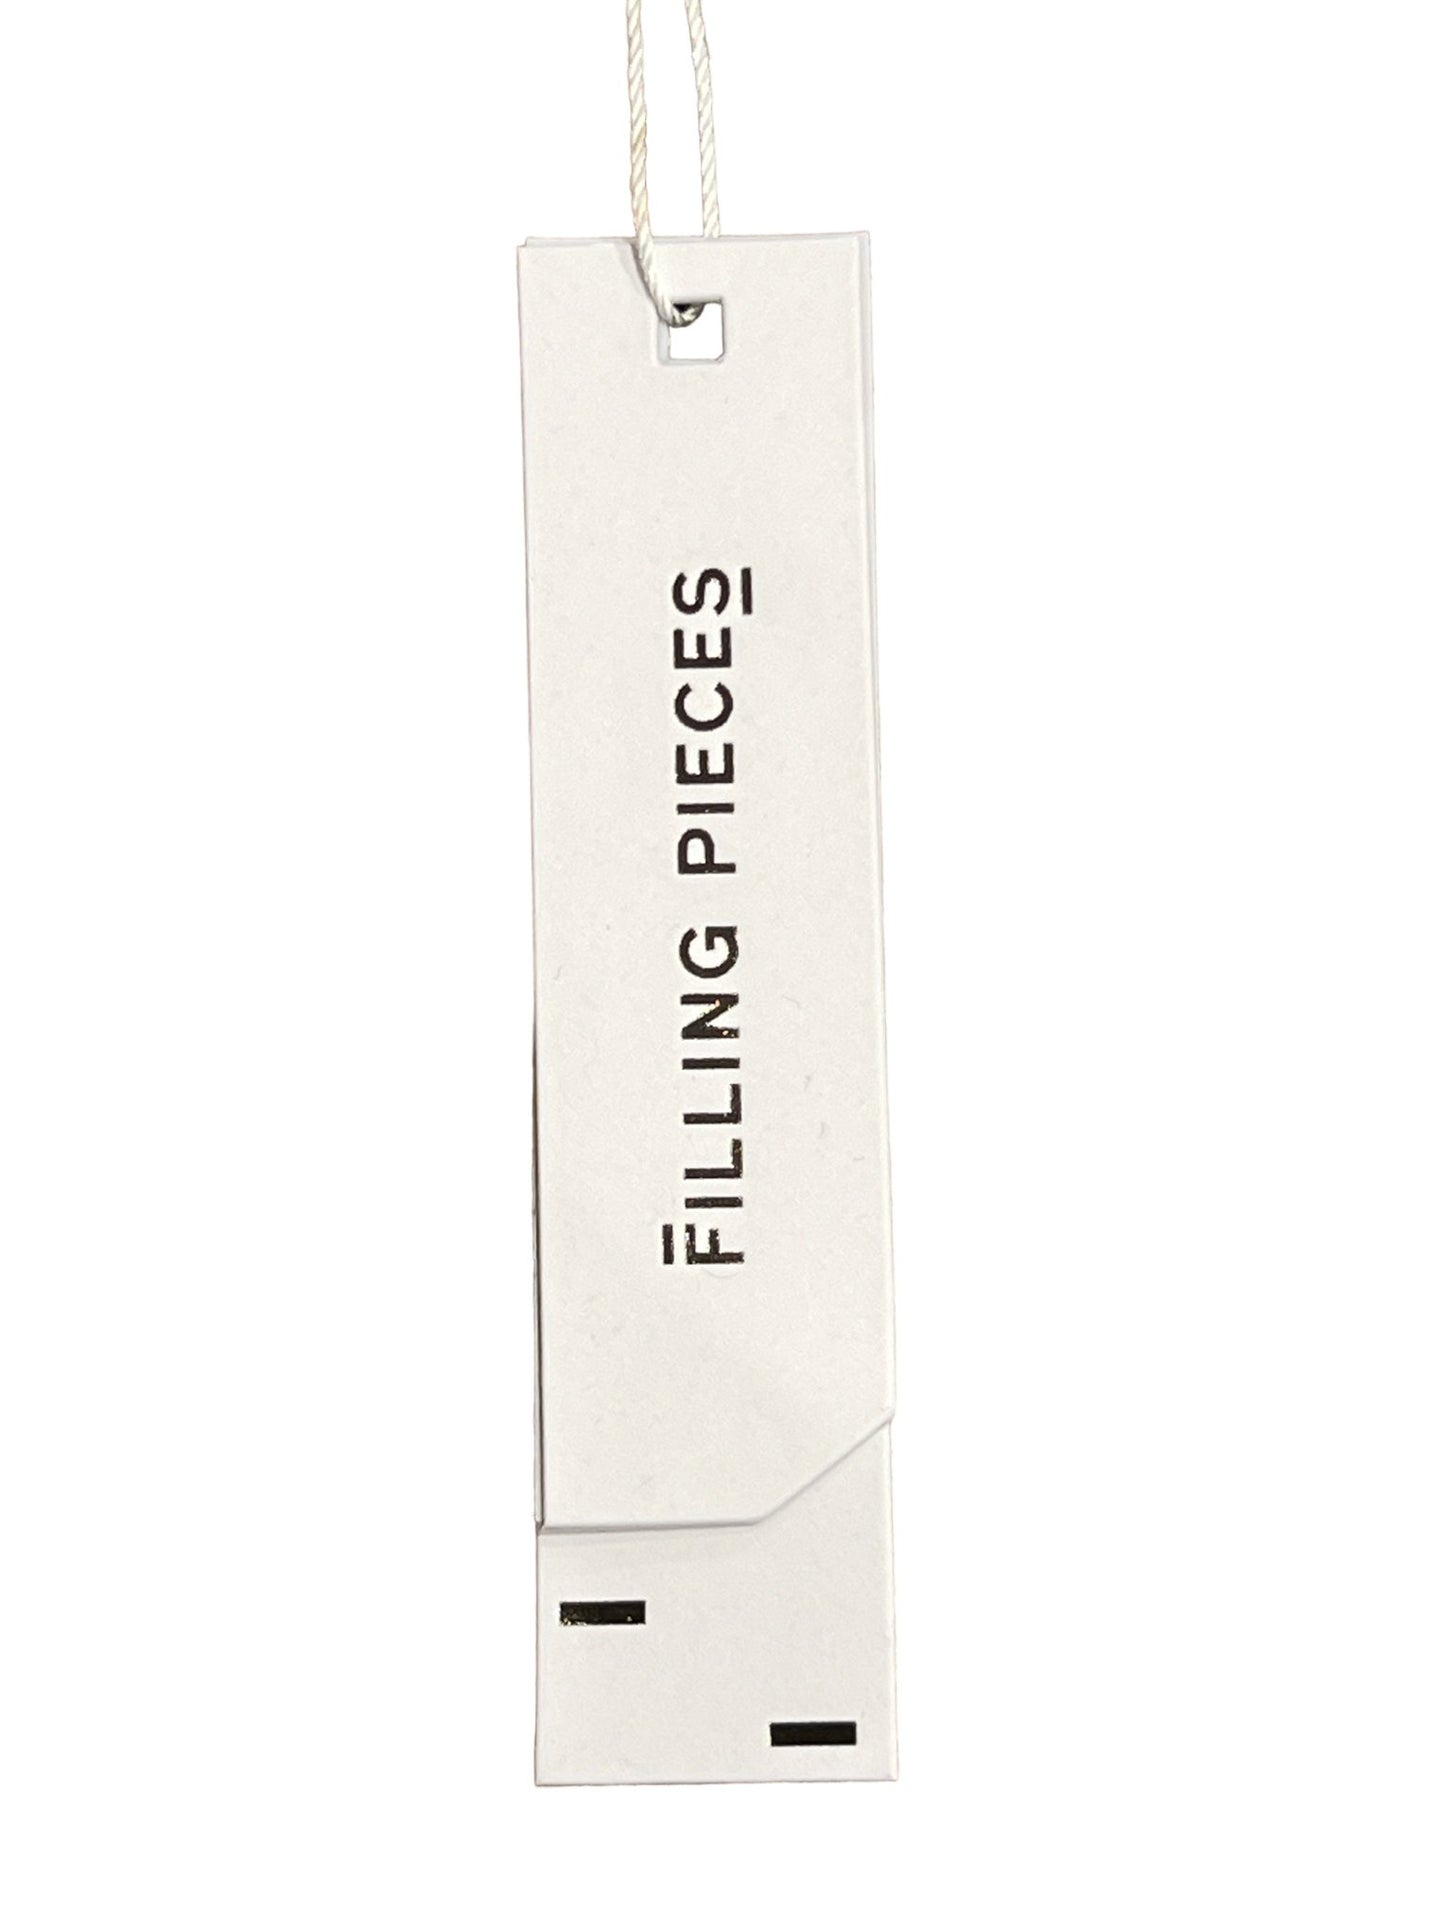 A clothing tag with the words "FILLING PIECES" printed on it for FILLING PIECES RESORT MONOGRAM SHORT OLIVE shorts.